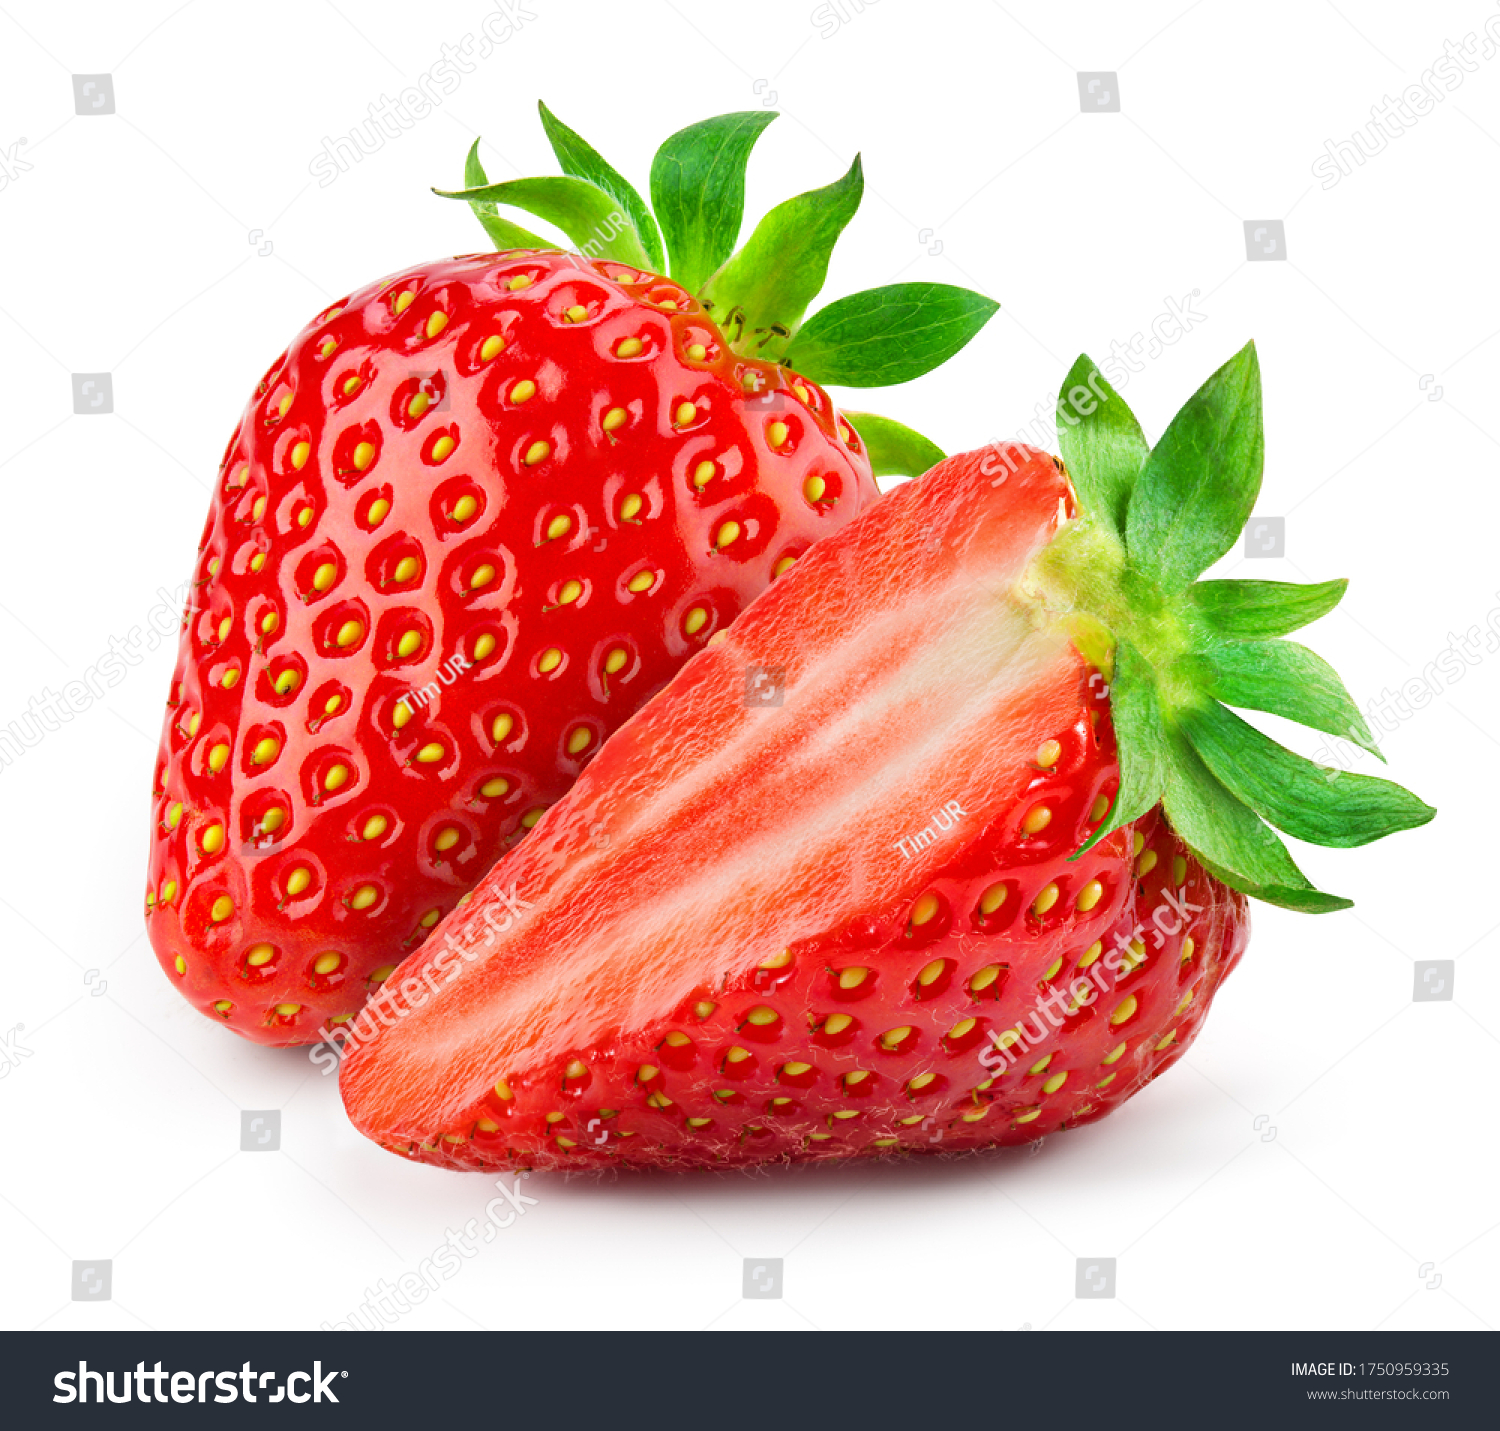 Strawberry isolated. Strawberries isolate. Whole, half, cut strawberry on white. Strawberries isolate. Side view organic strawberries. Full depth of field. With clipping path. #1750959335